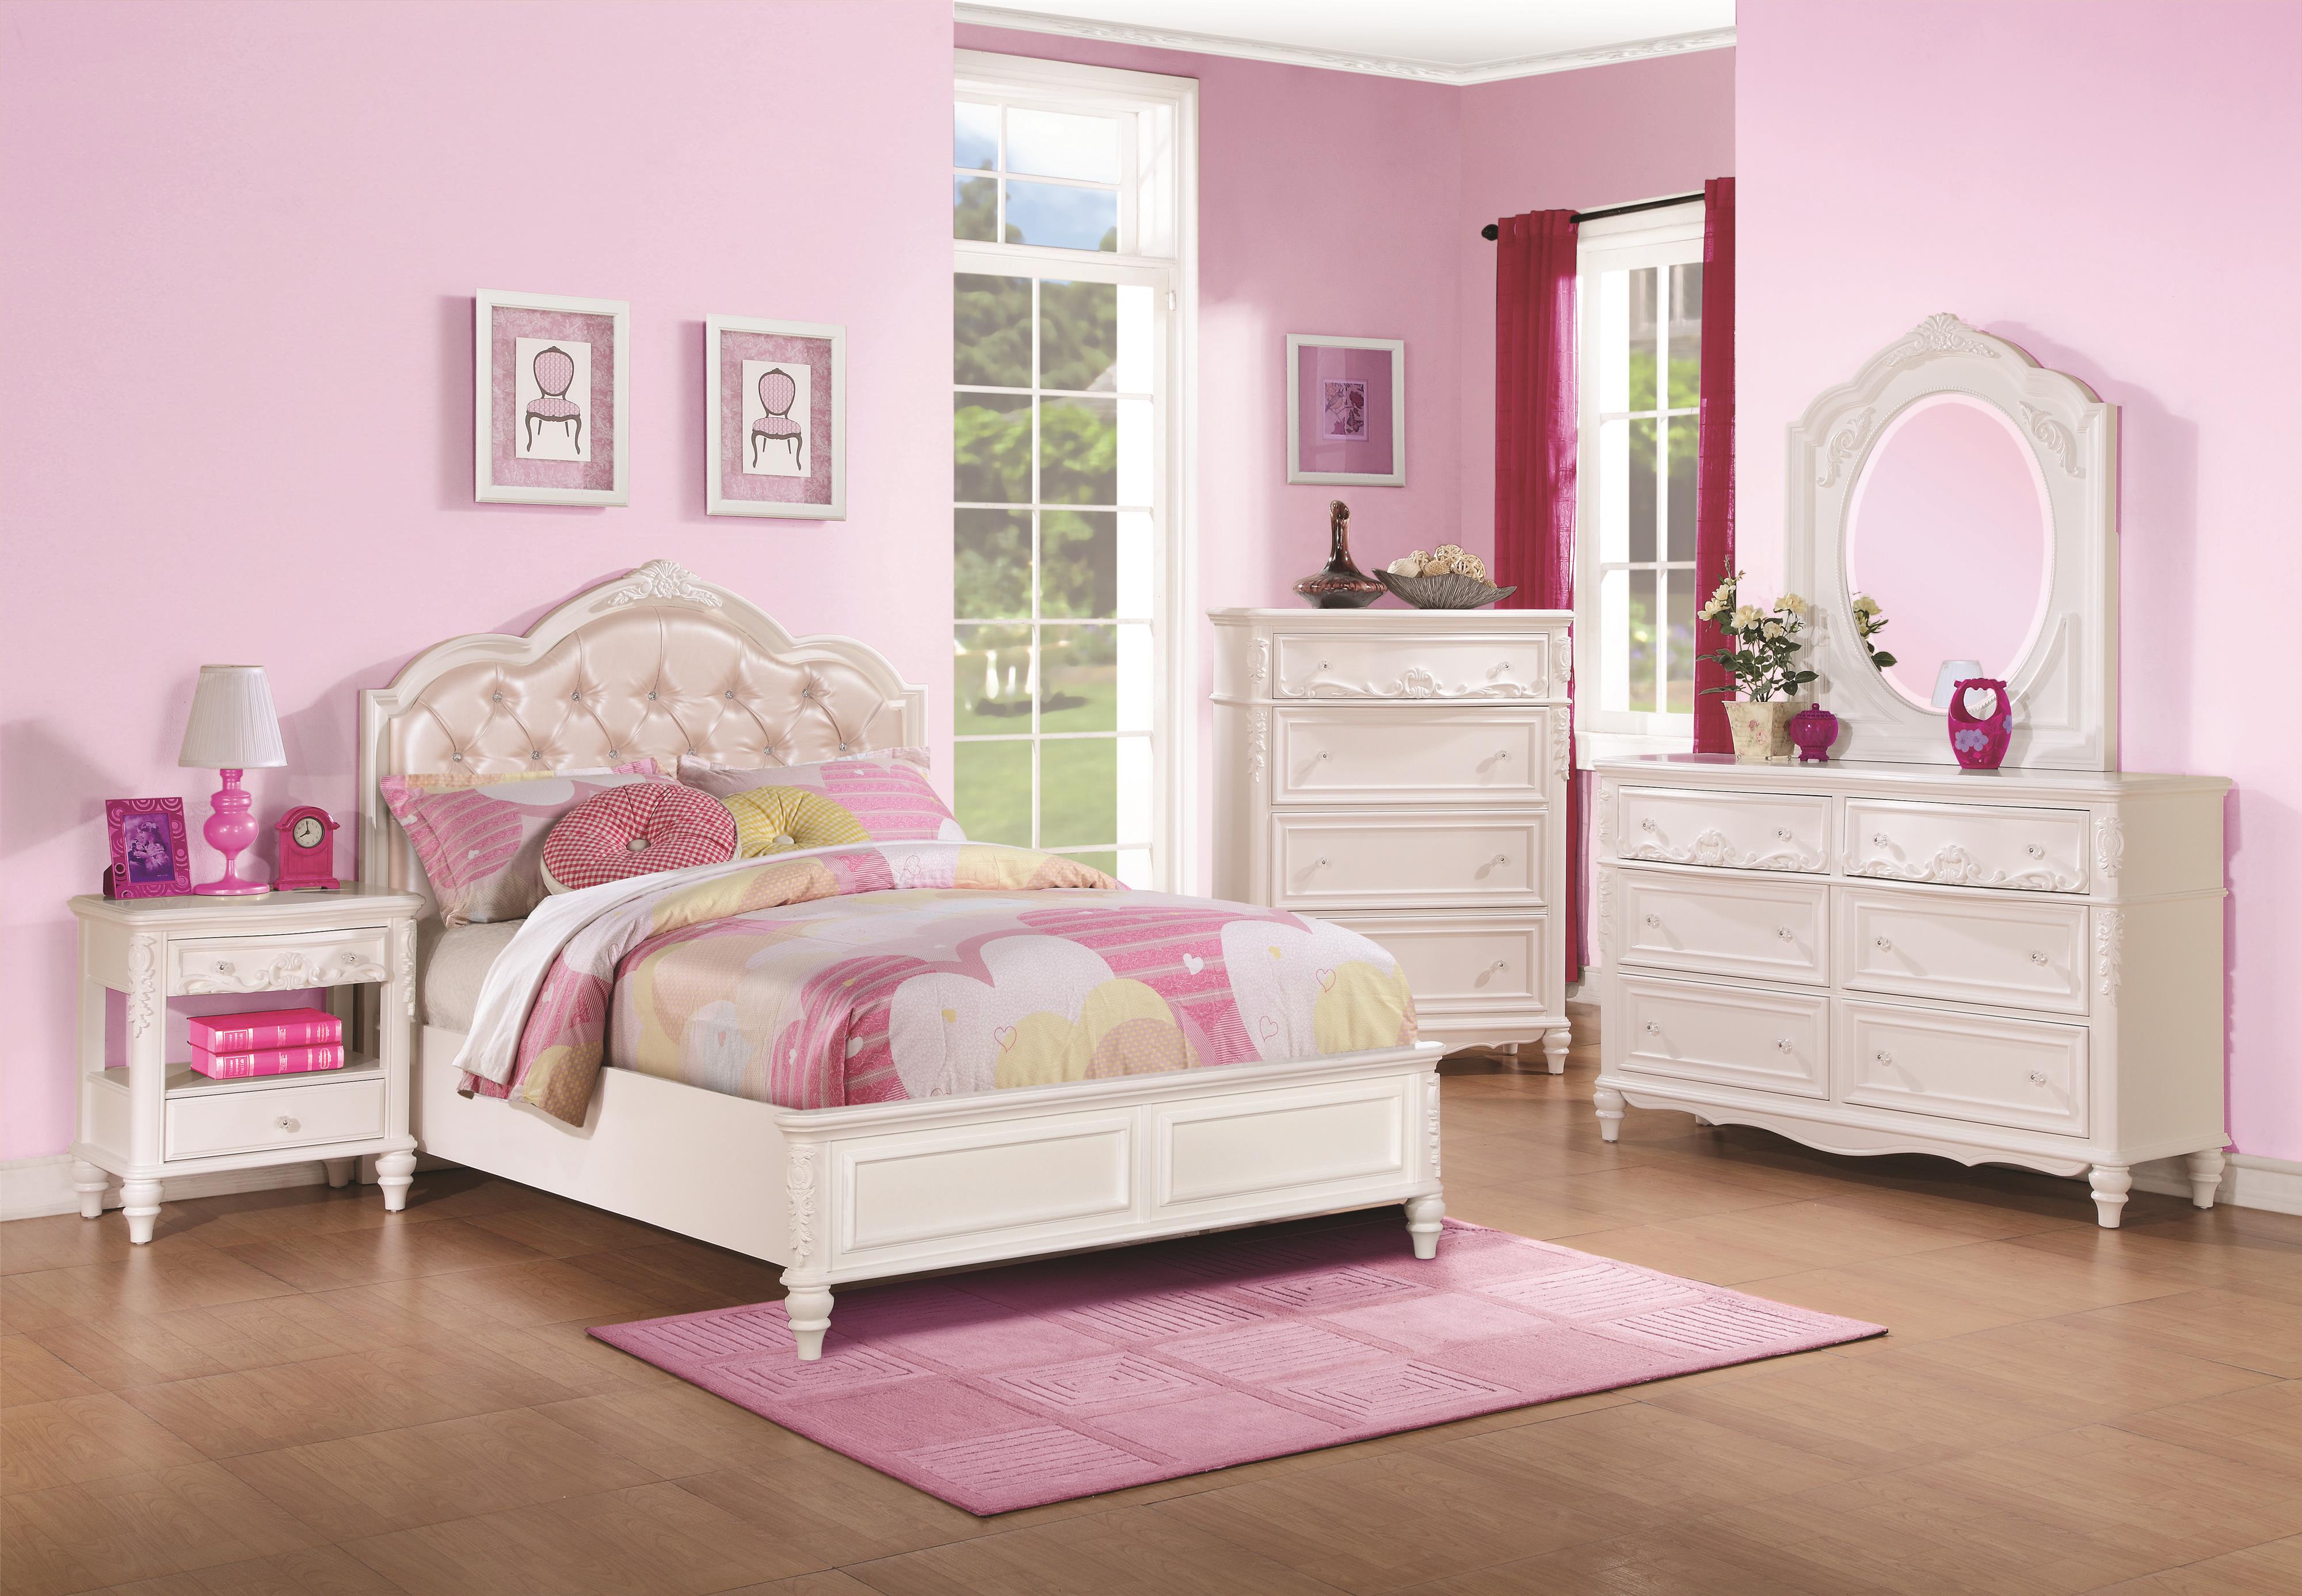 twin size bed for little girl